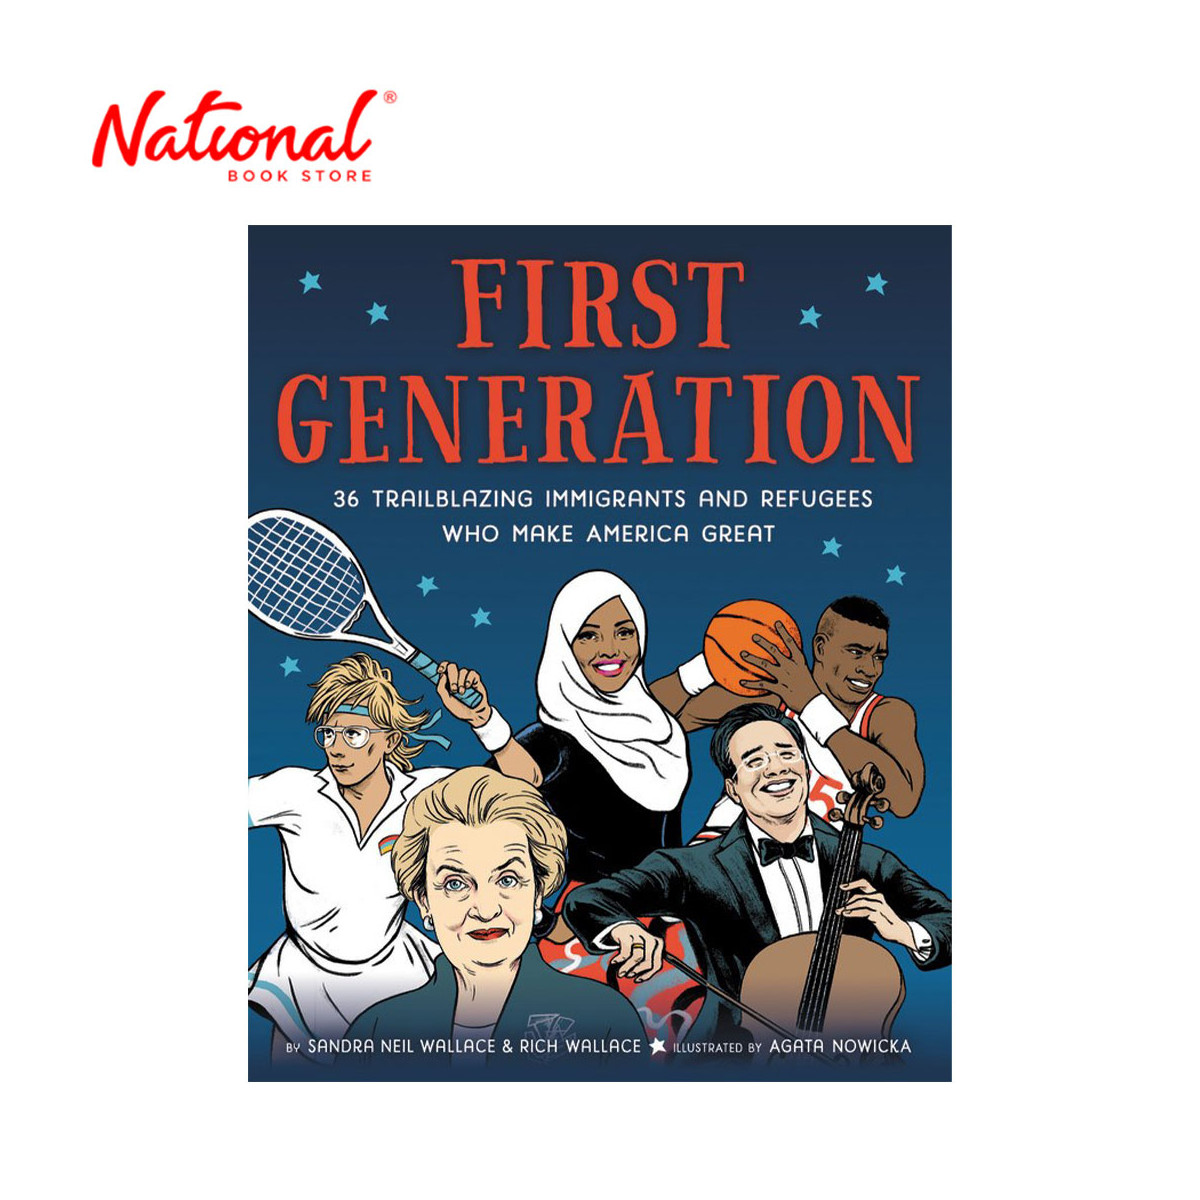 First Generation By Sandra Neil Wallace - Hardcover - Biography - Books for Kids